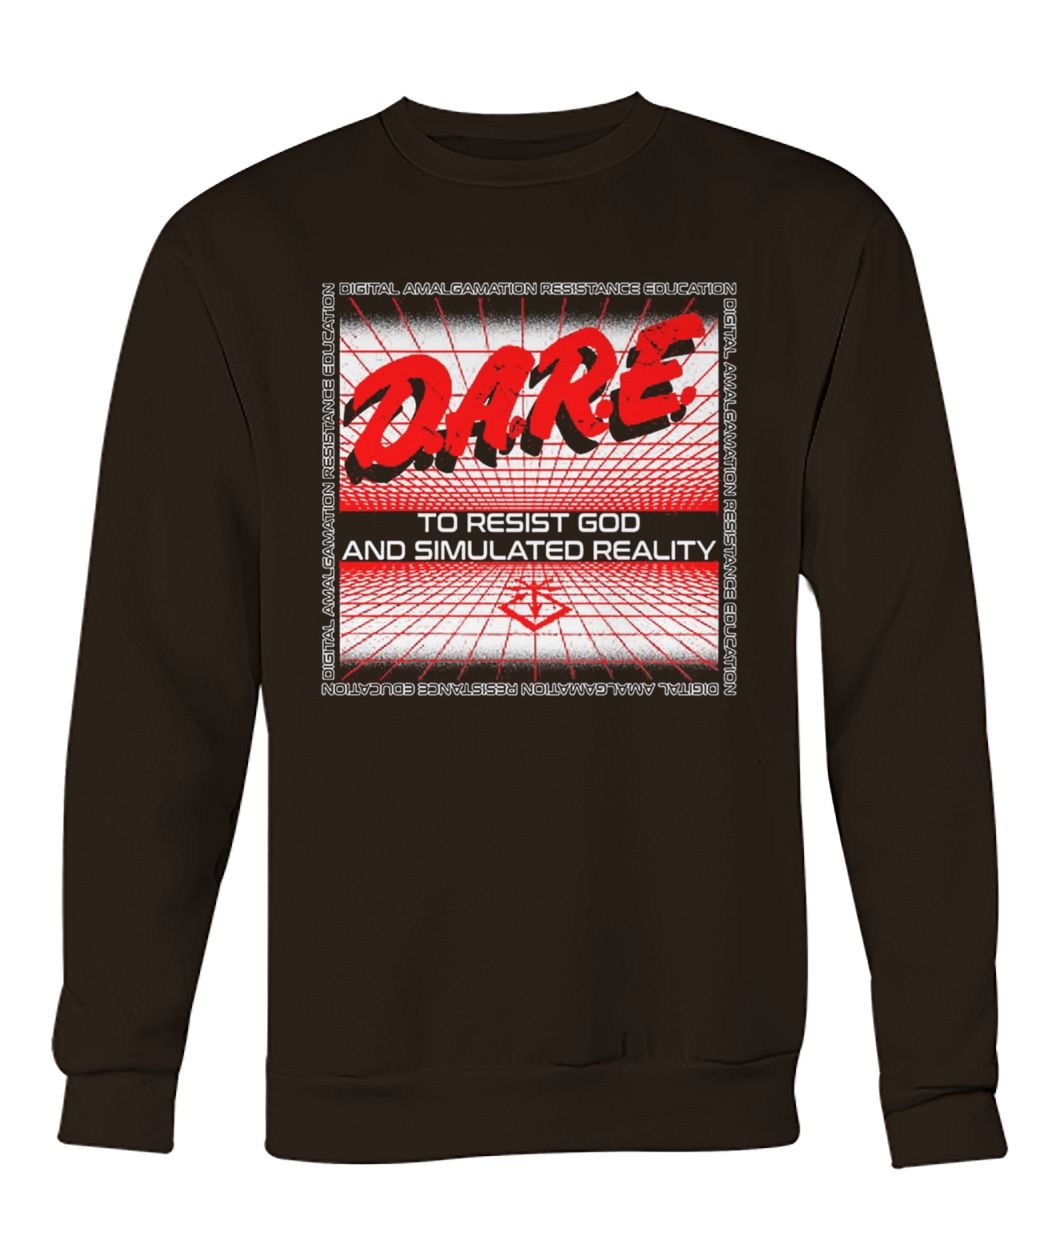 Dare to resist god and simulated reality crew neck sweatshirt